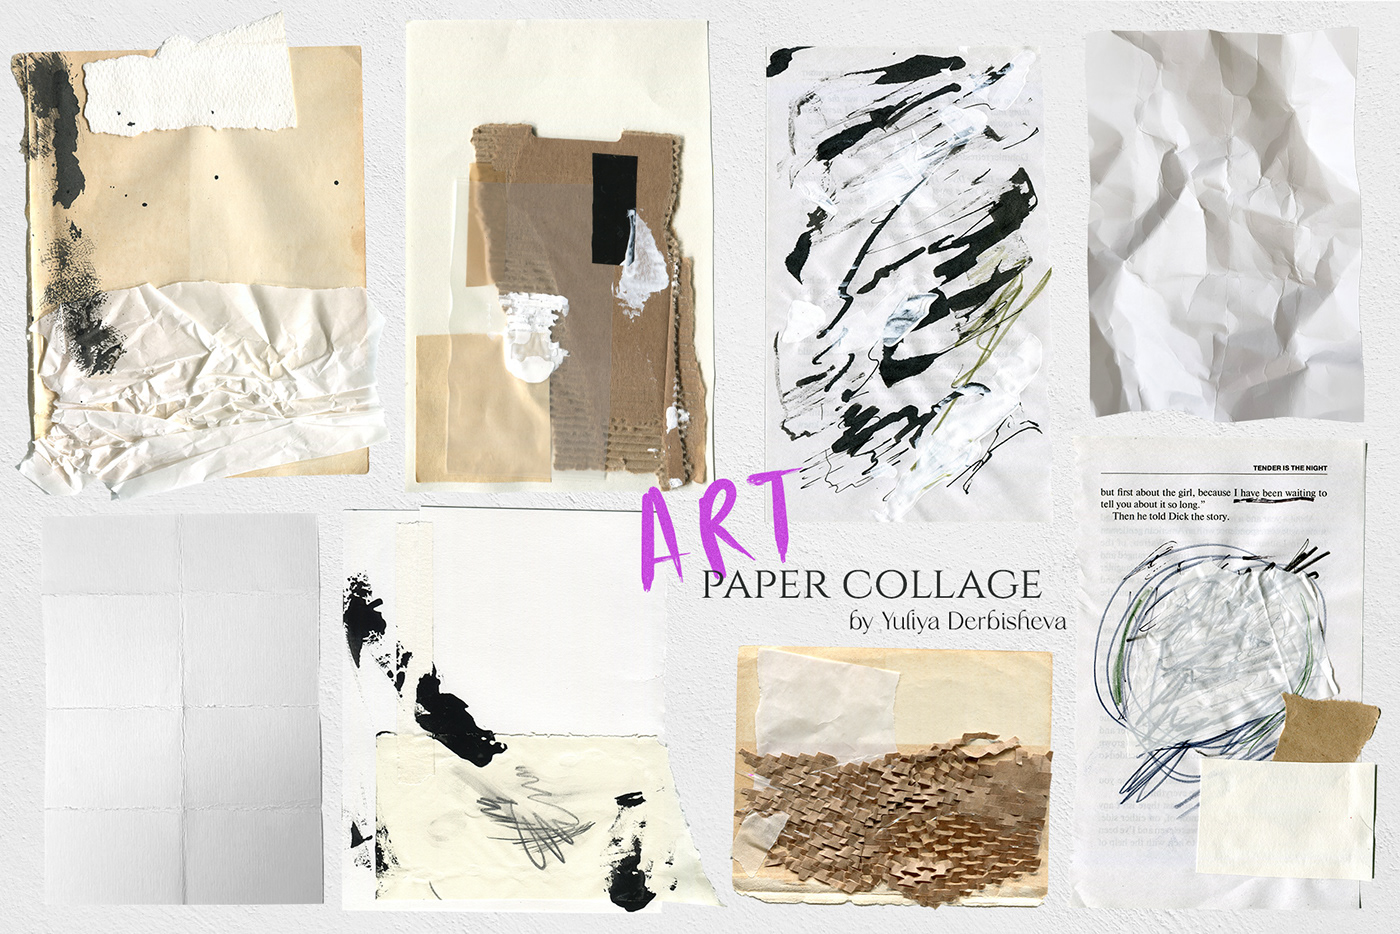 Cut, torn, crumpled paper & collages, tape, illustrations, handwritten font Quick notes